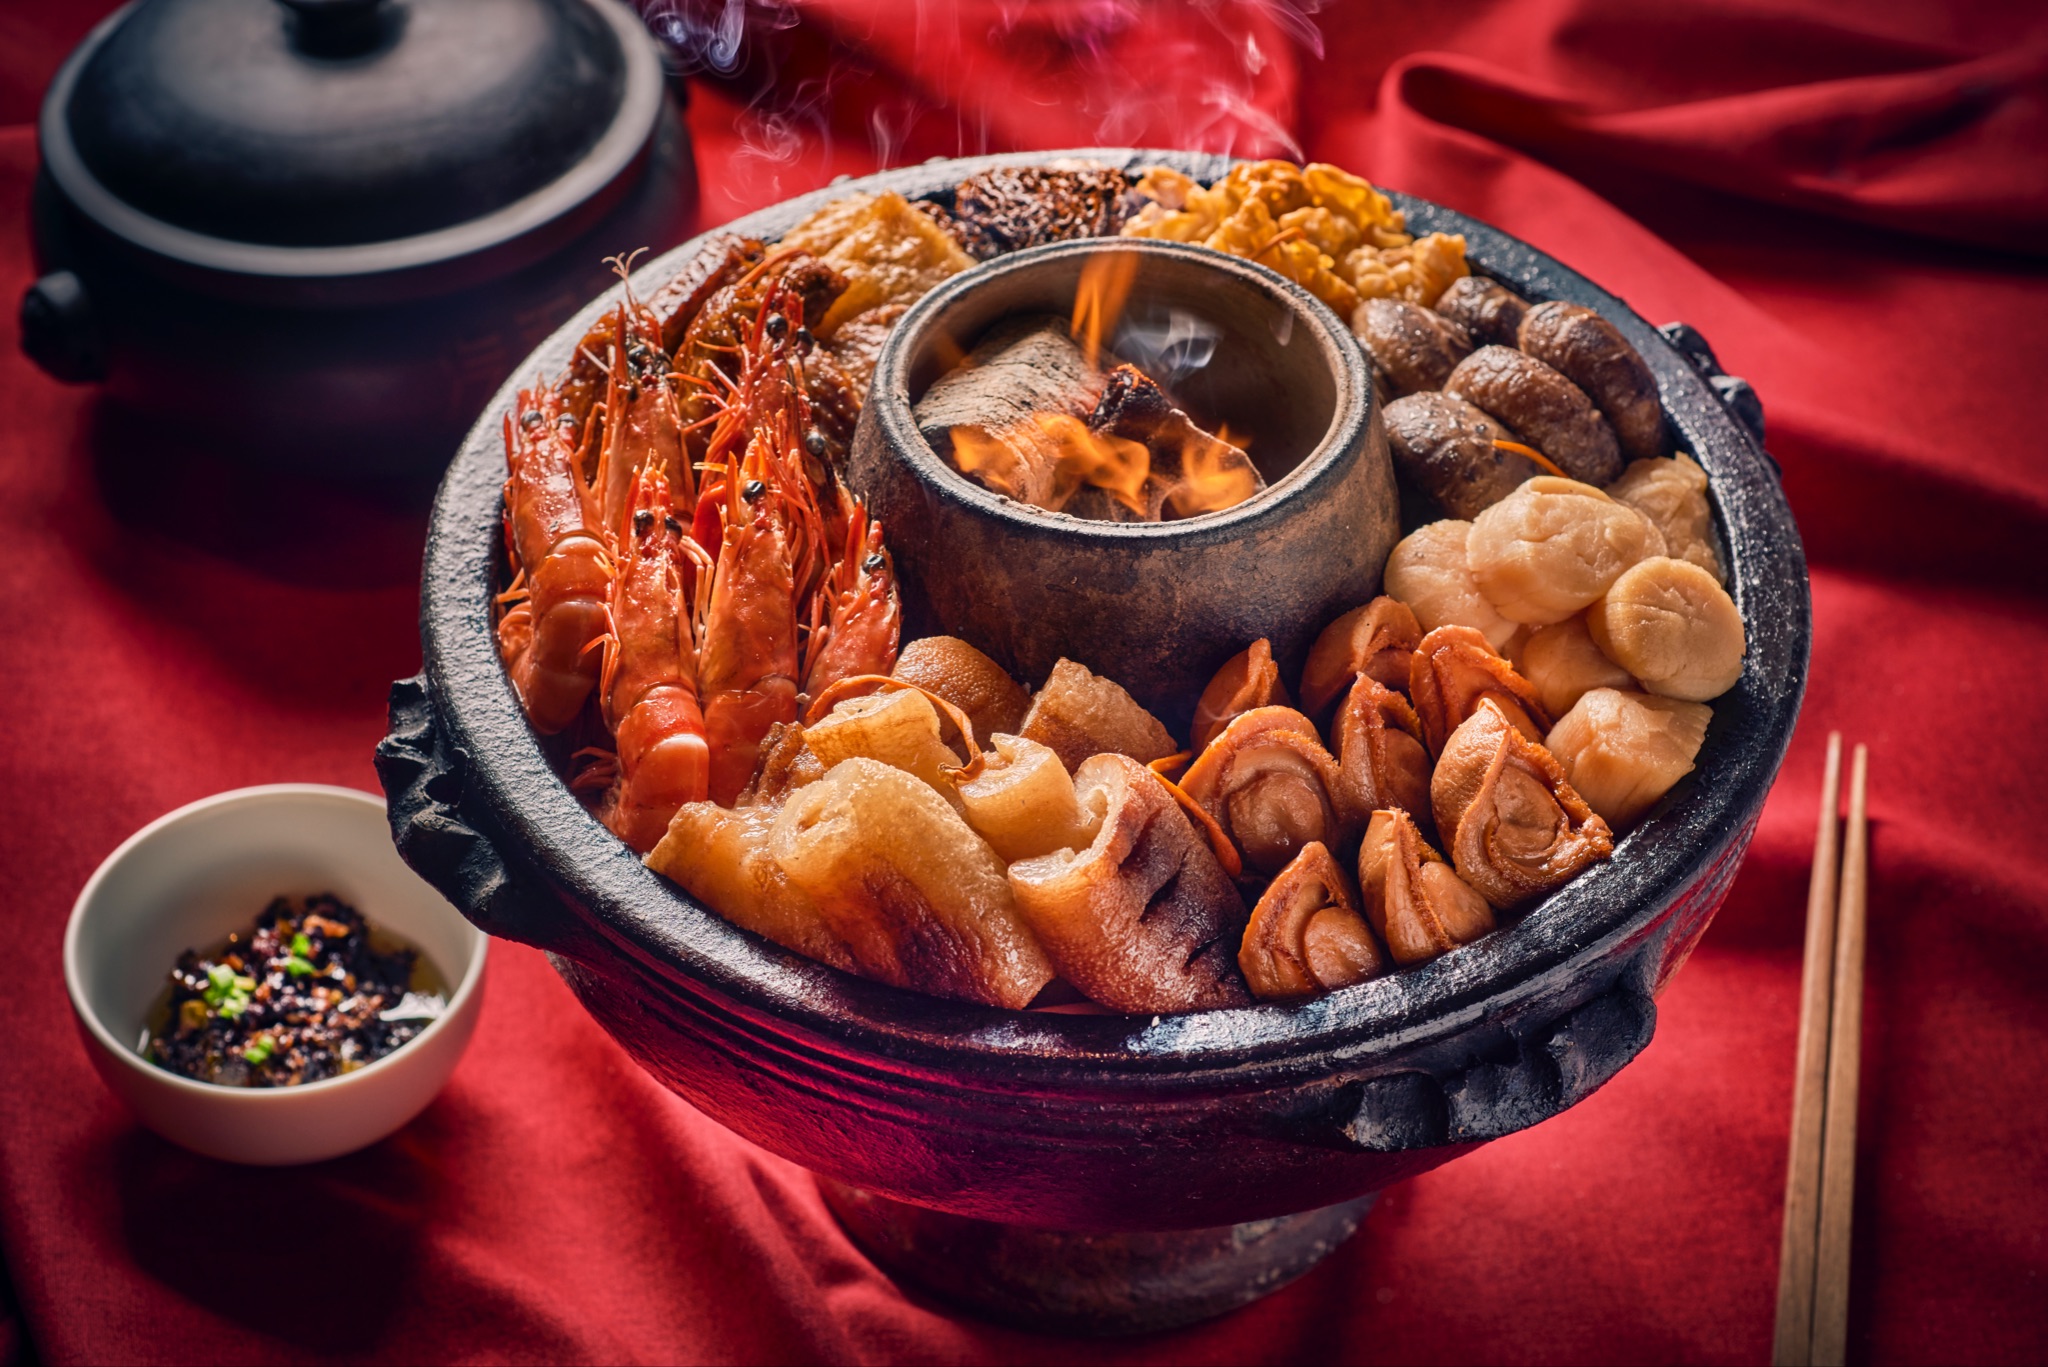 Lobang: MORE THAN 50 CNY 2023 F&B Deals - Your one stop guide to Yusheng, Pen Cai, Set Menus and more this Lunar New Year! - 85